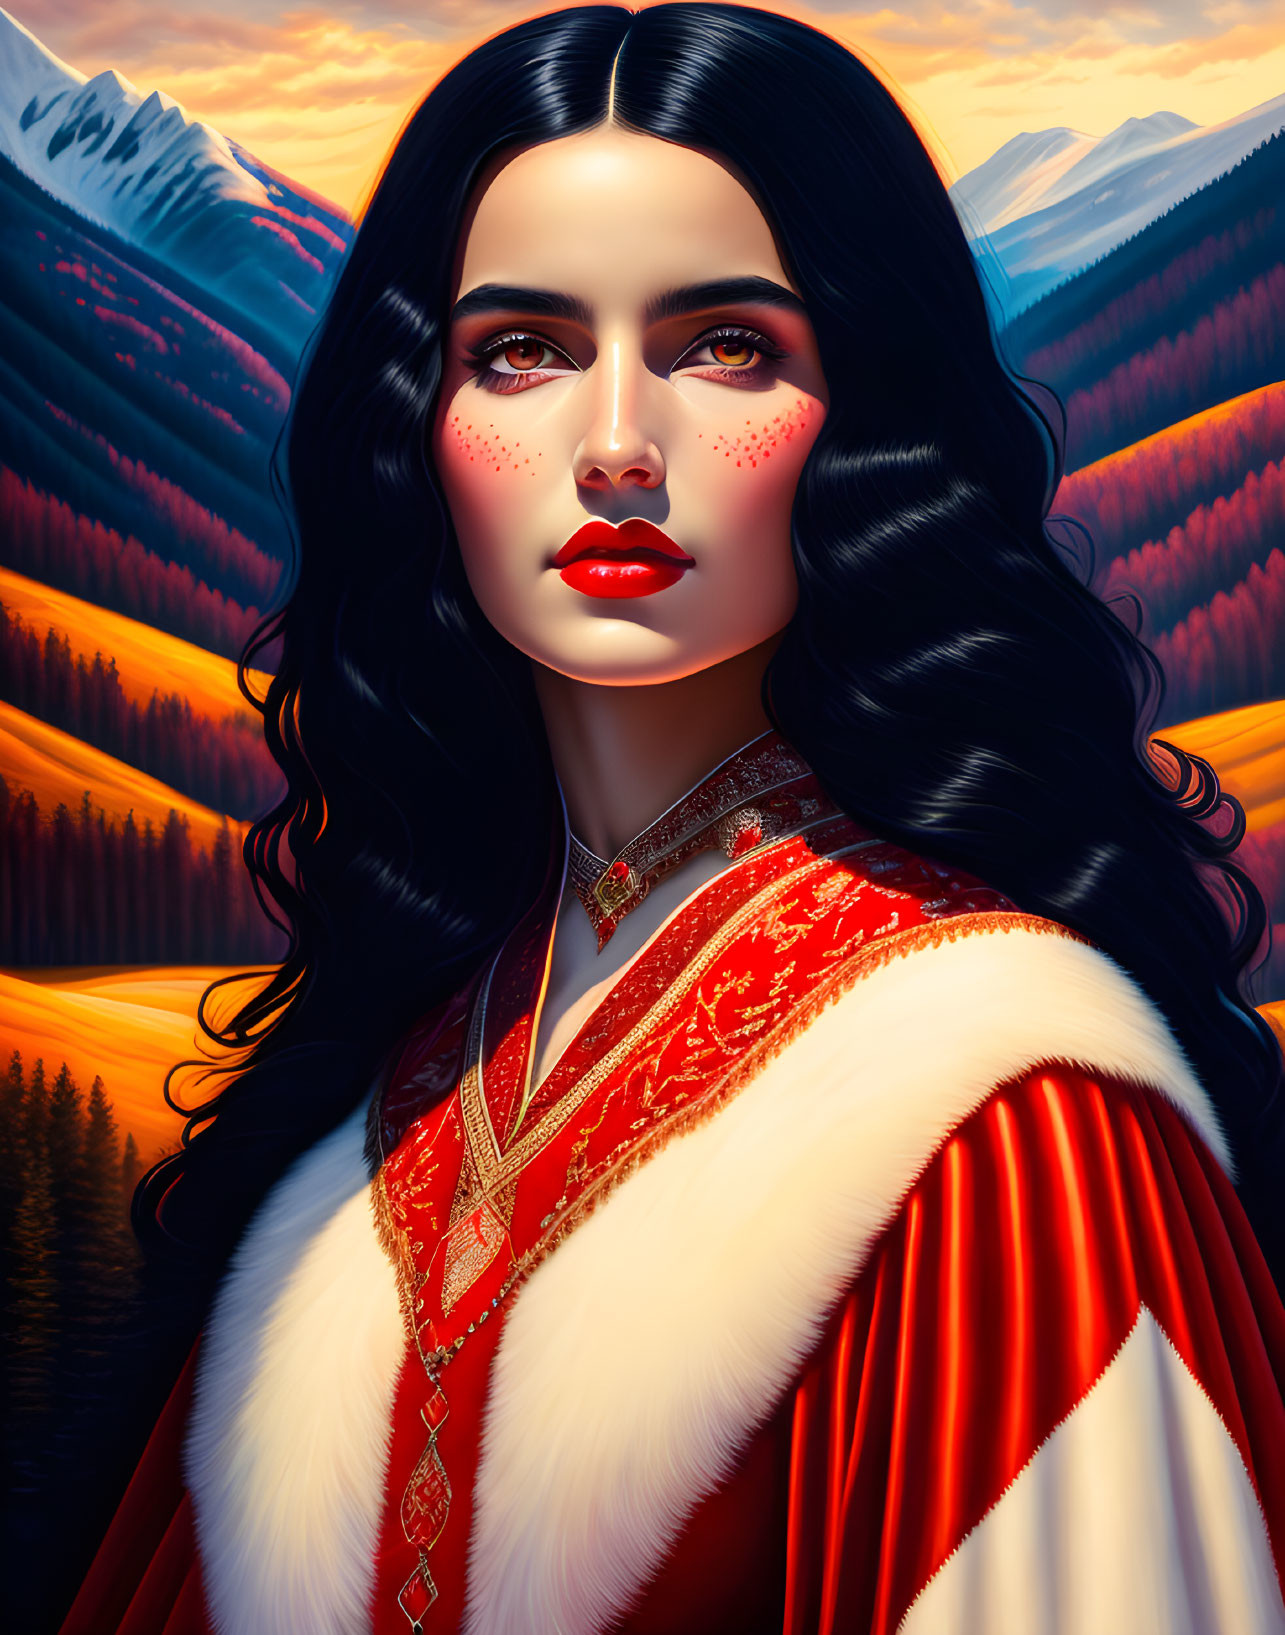 Woman in traditional attire with black hair and red lipstick against autumn mountain backdrop